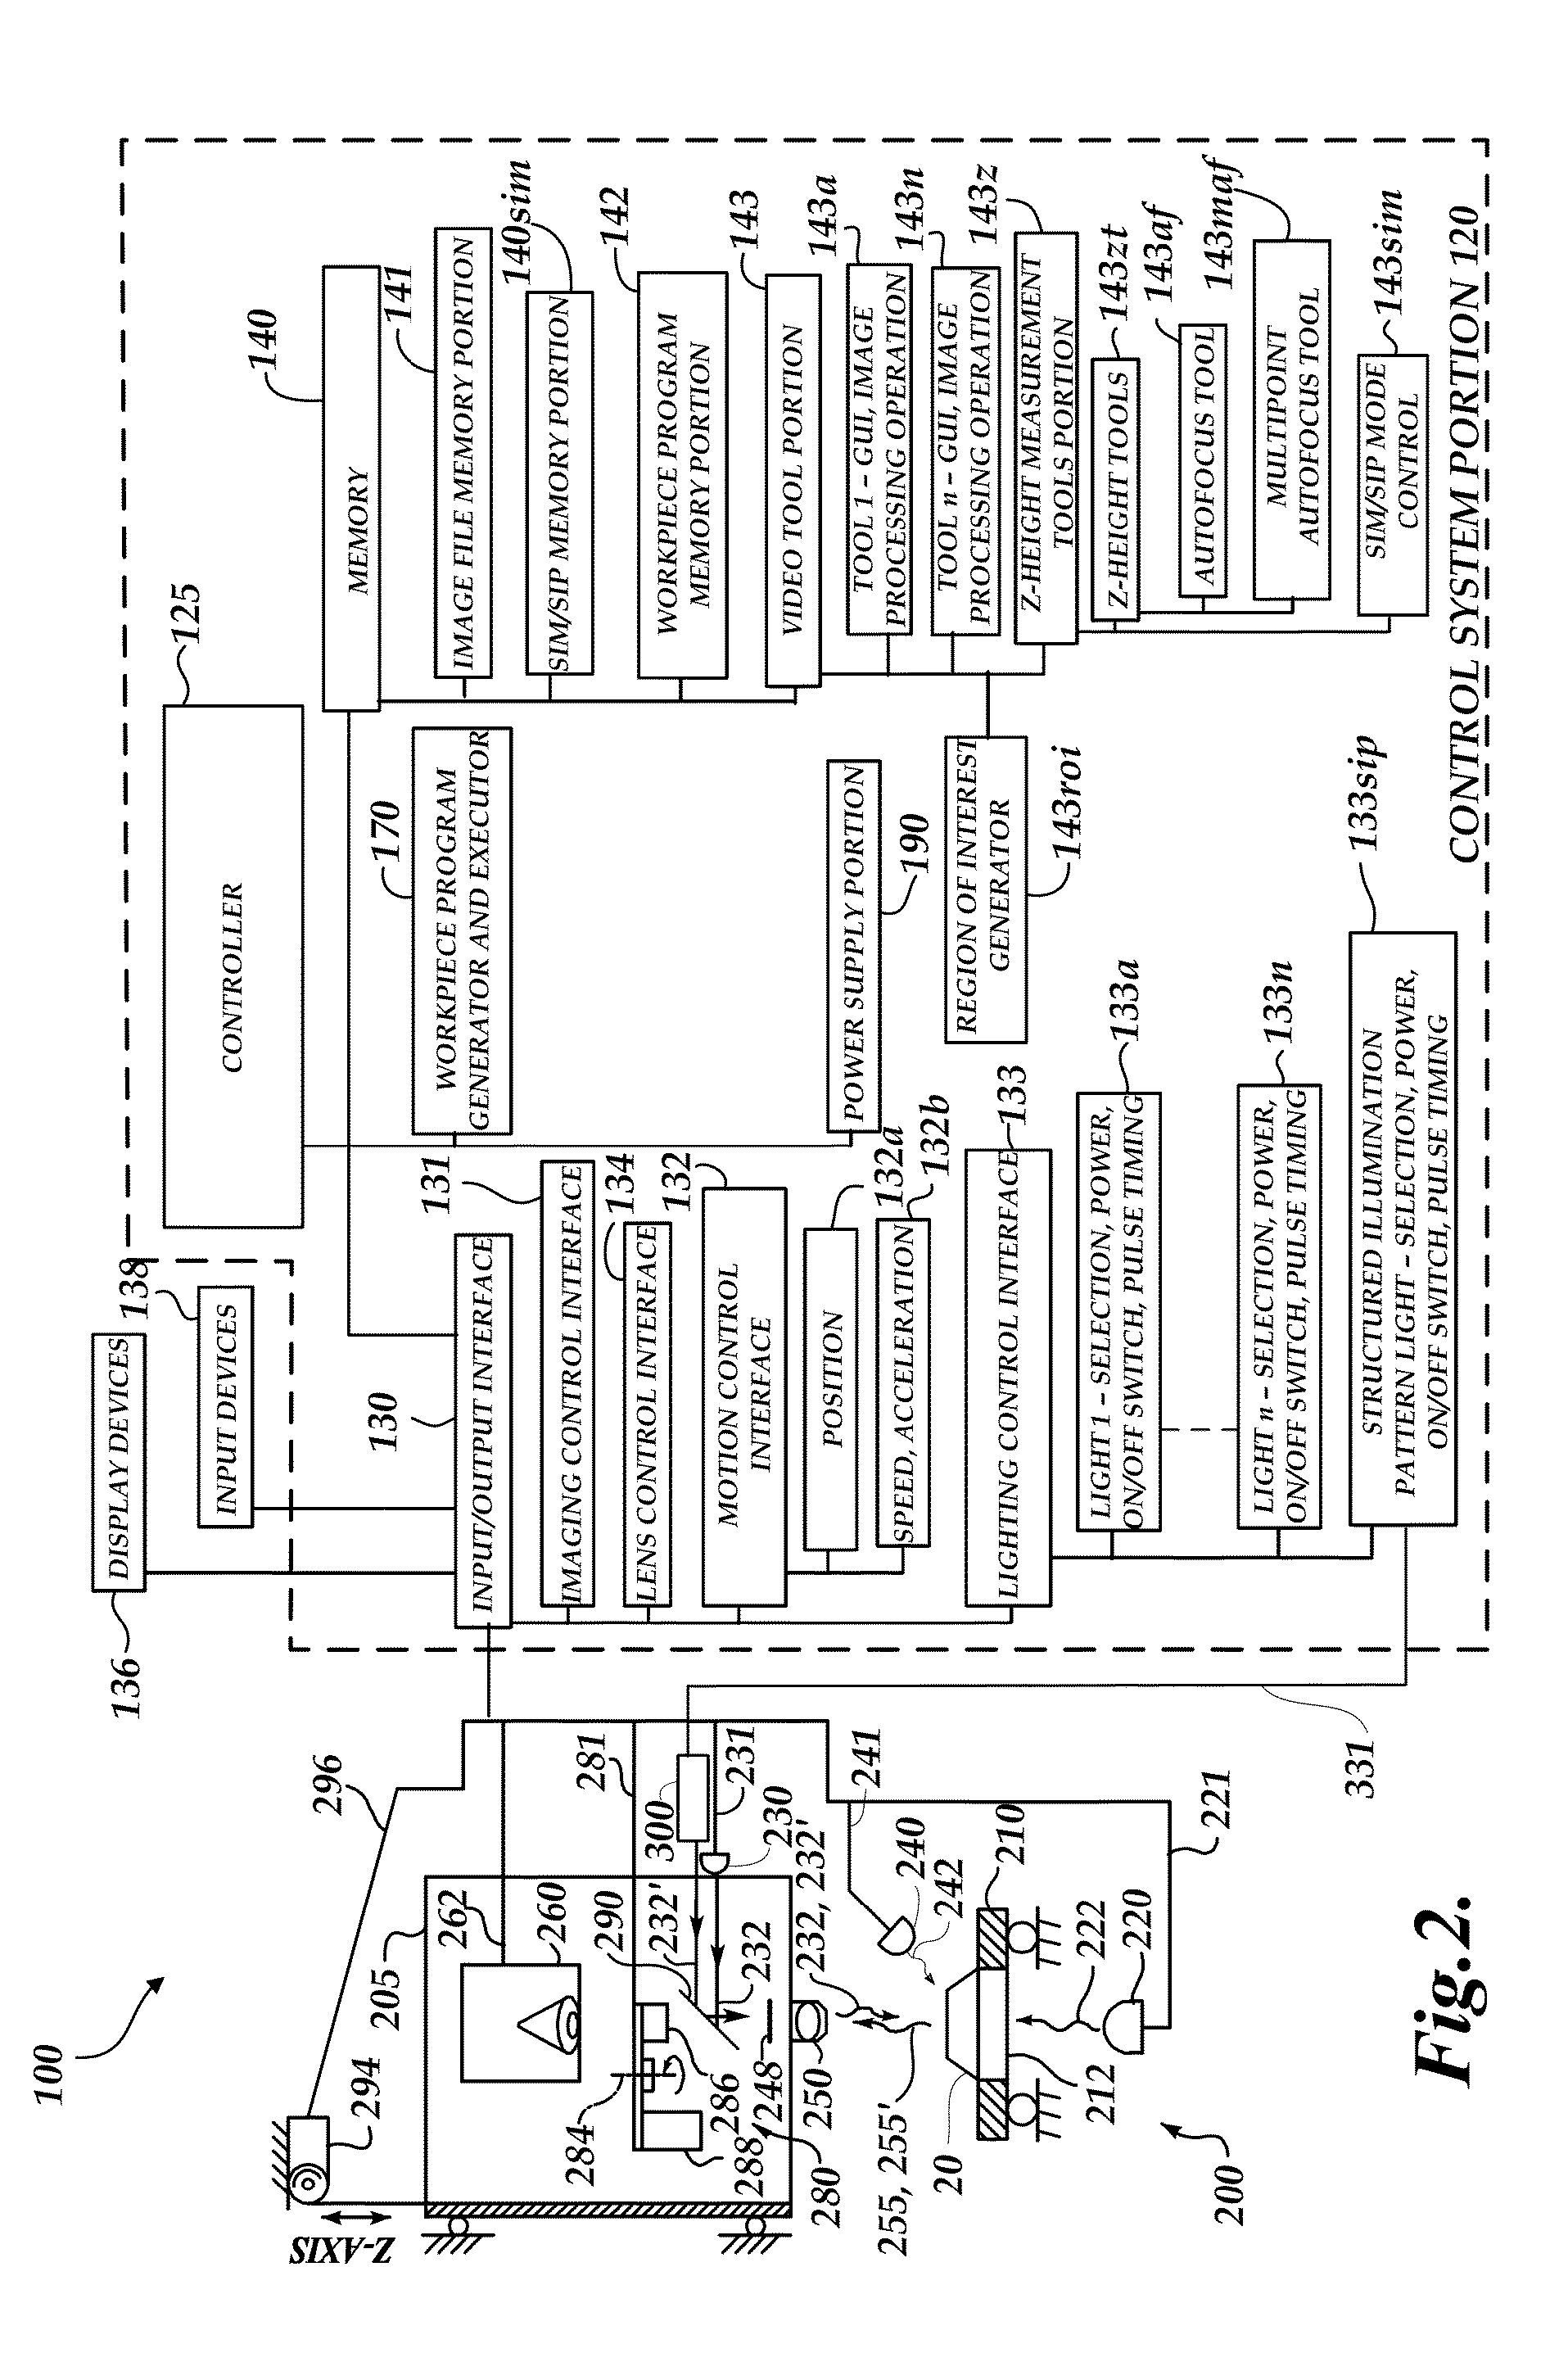 Structured illumination microscopy optical arrangement including projection artifact supression element